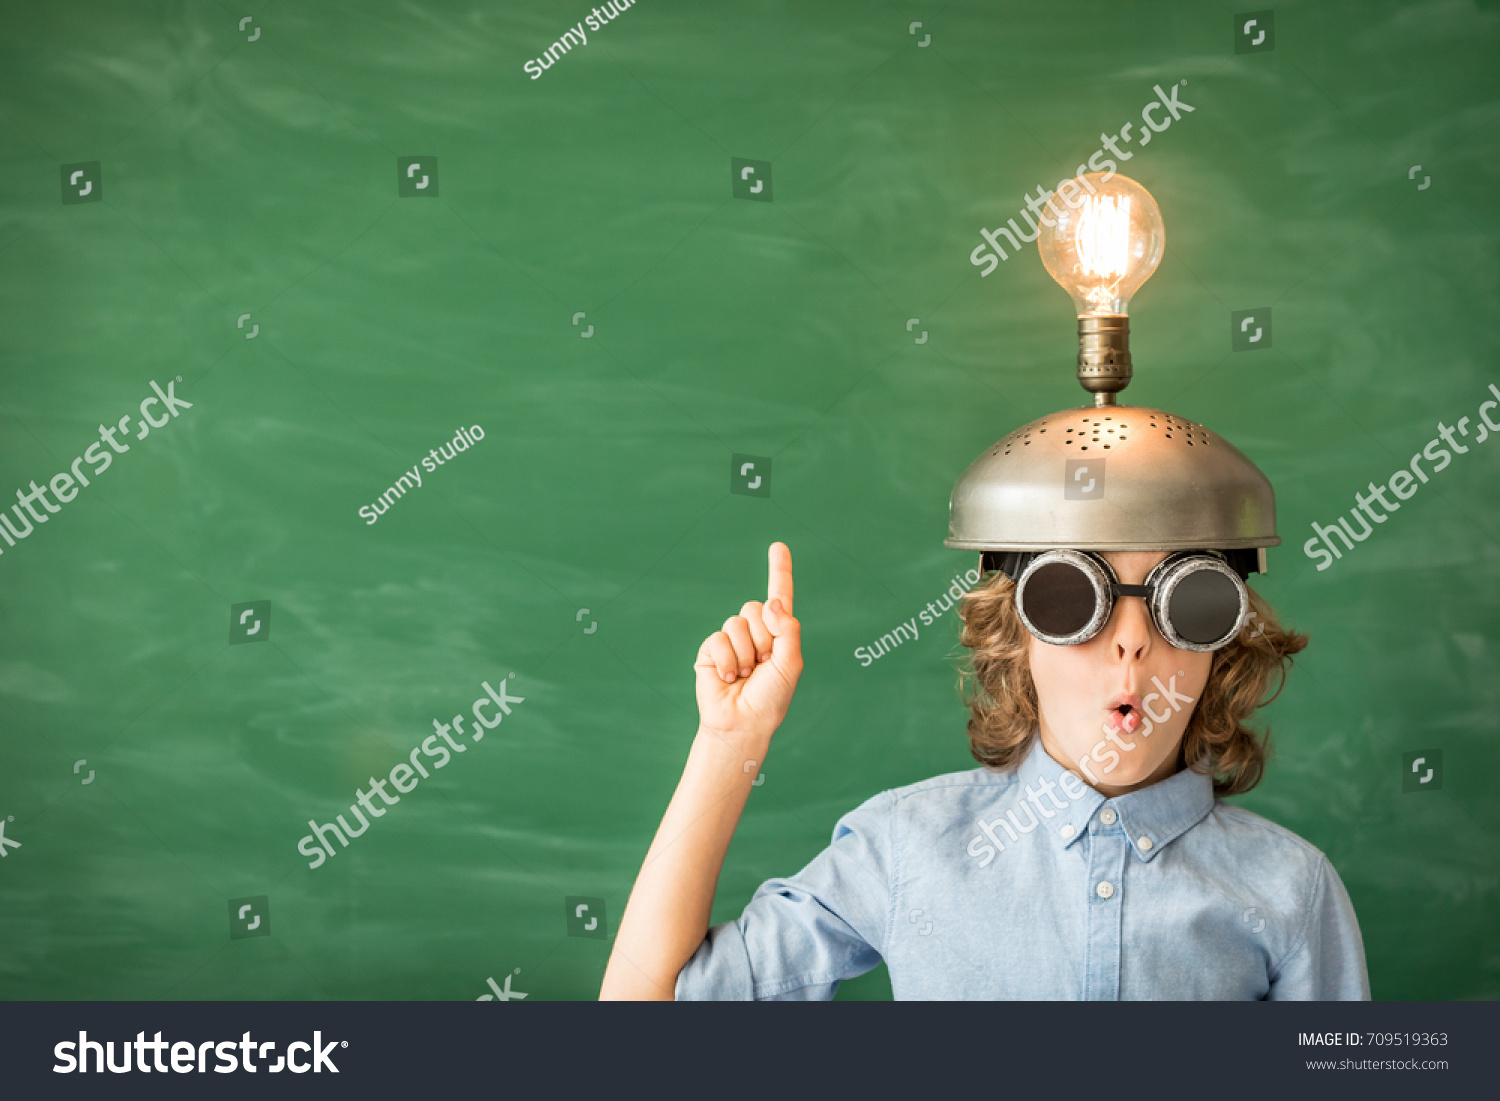 Portrait of child in classroom. Child with toy virtual reality headset in class. Success, idea and innovation technology concept. Back to school. Kid against blackboard with copy space #709519363